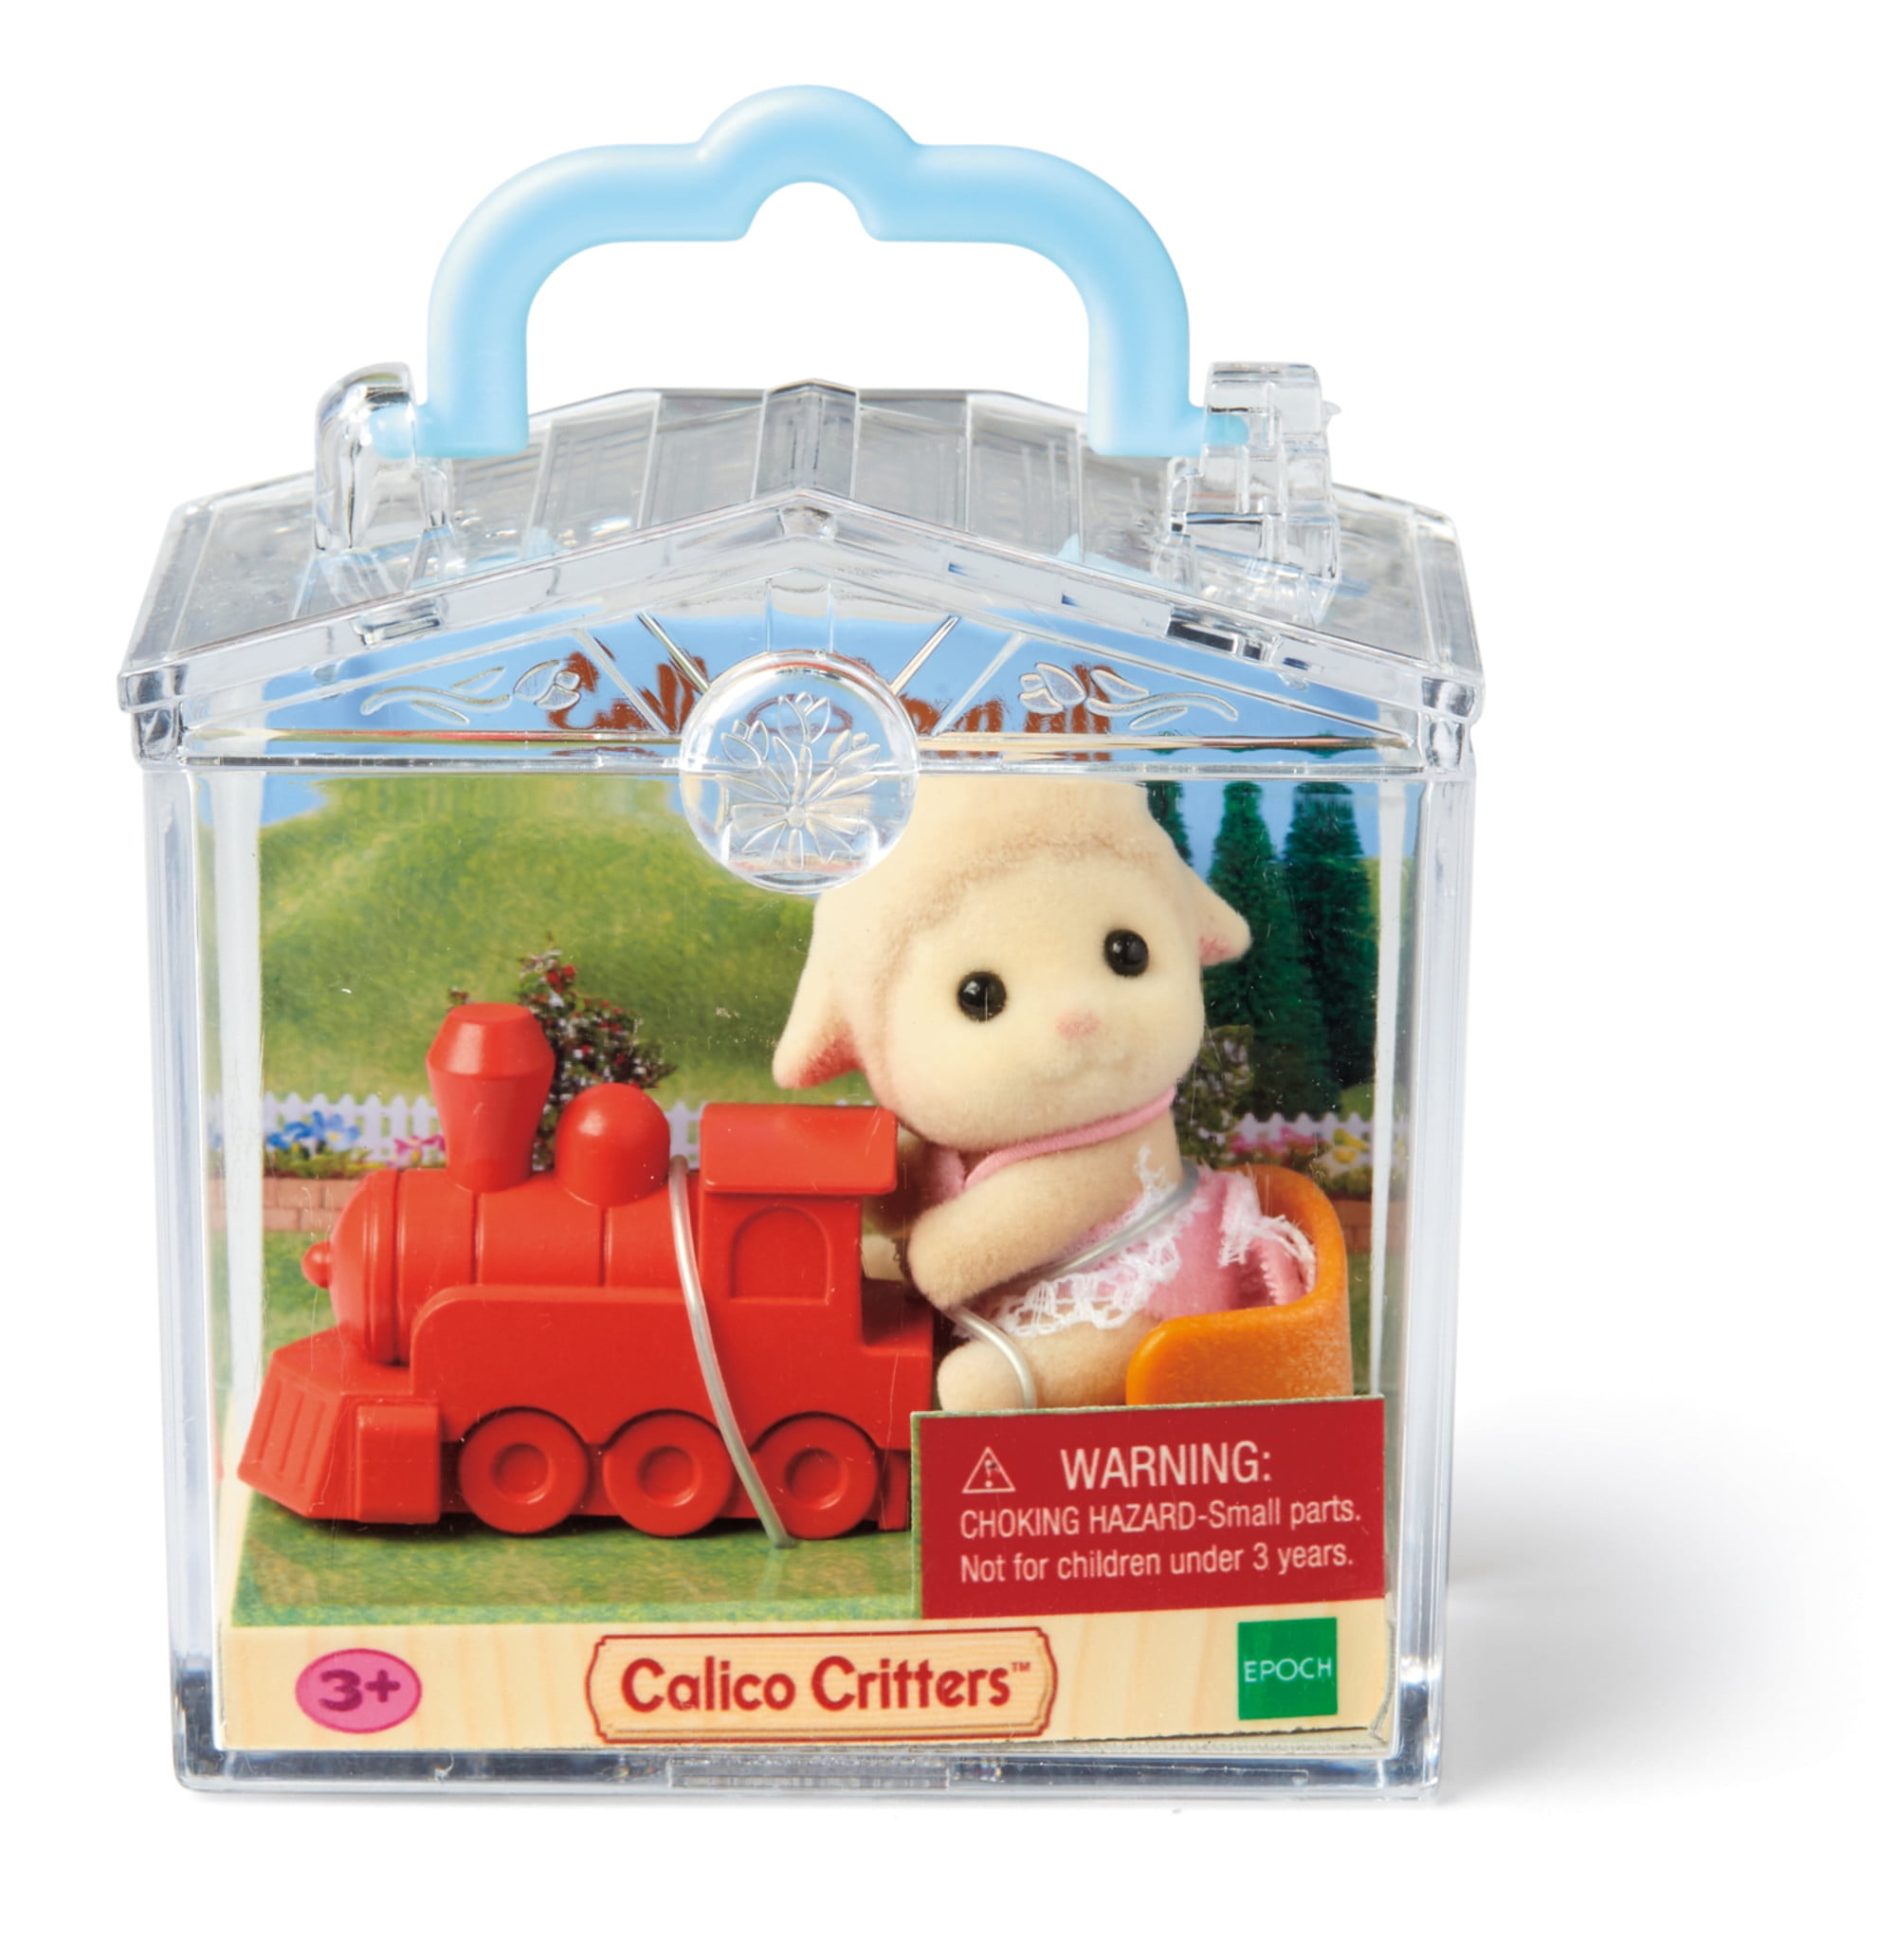 Calico Critters Baby Lamb Figure with Red Train in Clear Display Case BRAND NEW